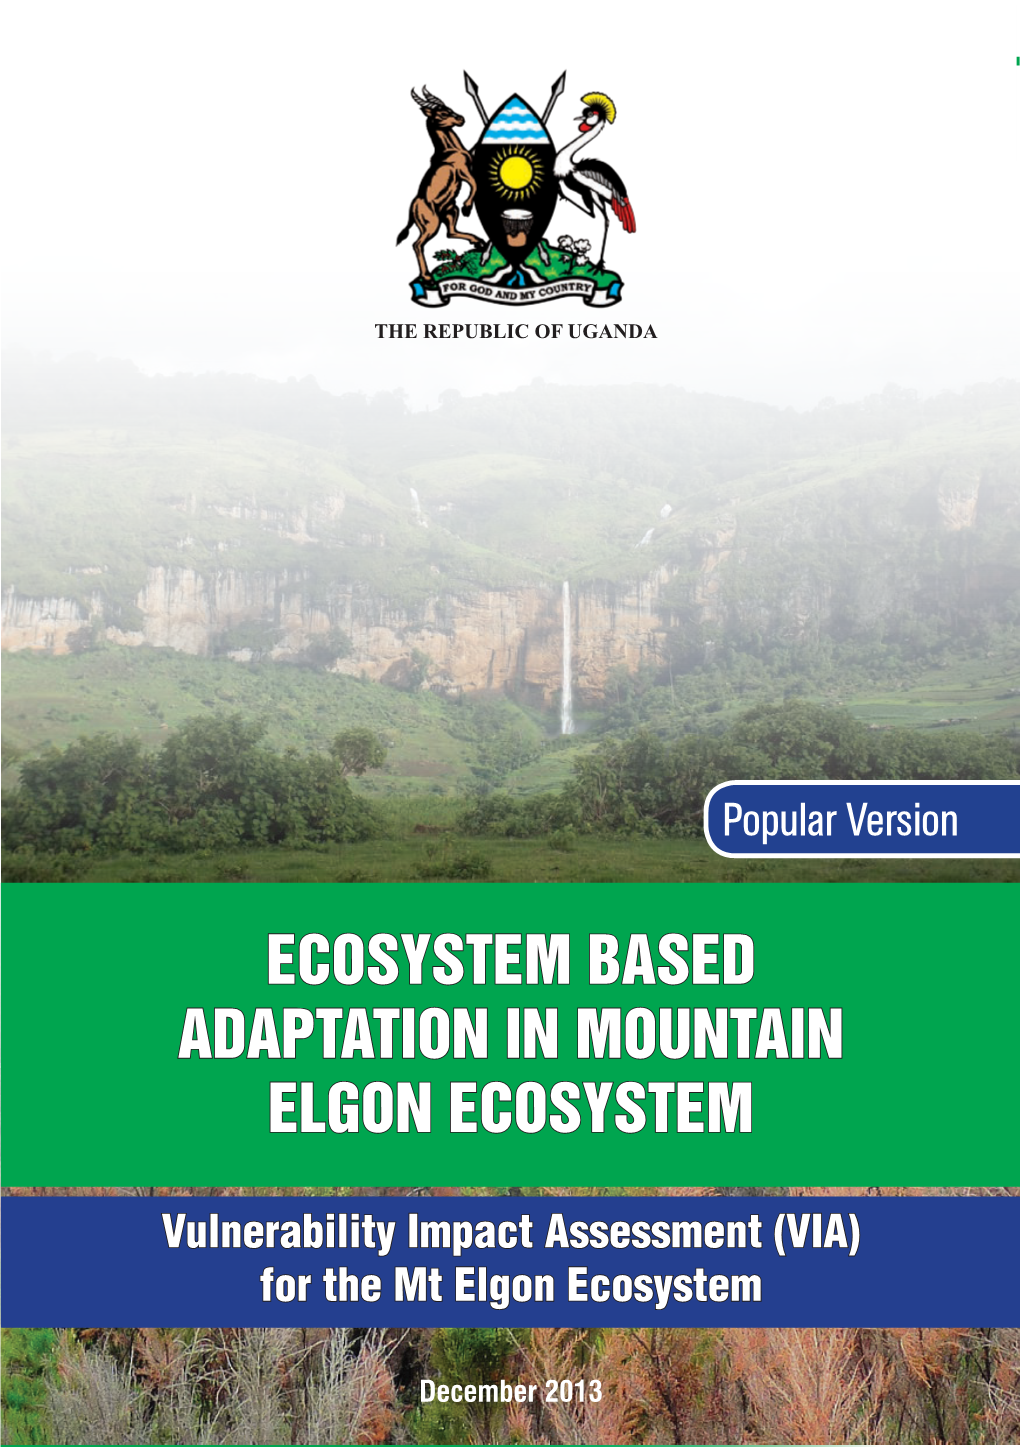 ECOSYSTEM BASED ADAPTATION in MOUNTAIN ELGON ECOSYSTEM [Vulnerability Impact Assessment (VIA) for the Mt Elgon Ecosystem Report]